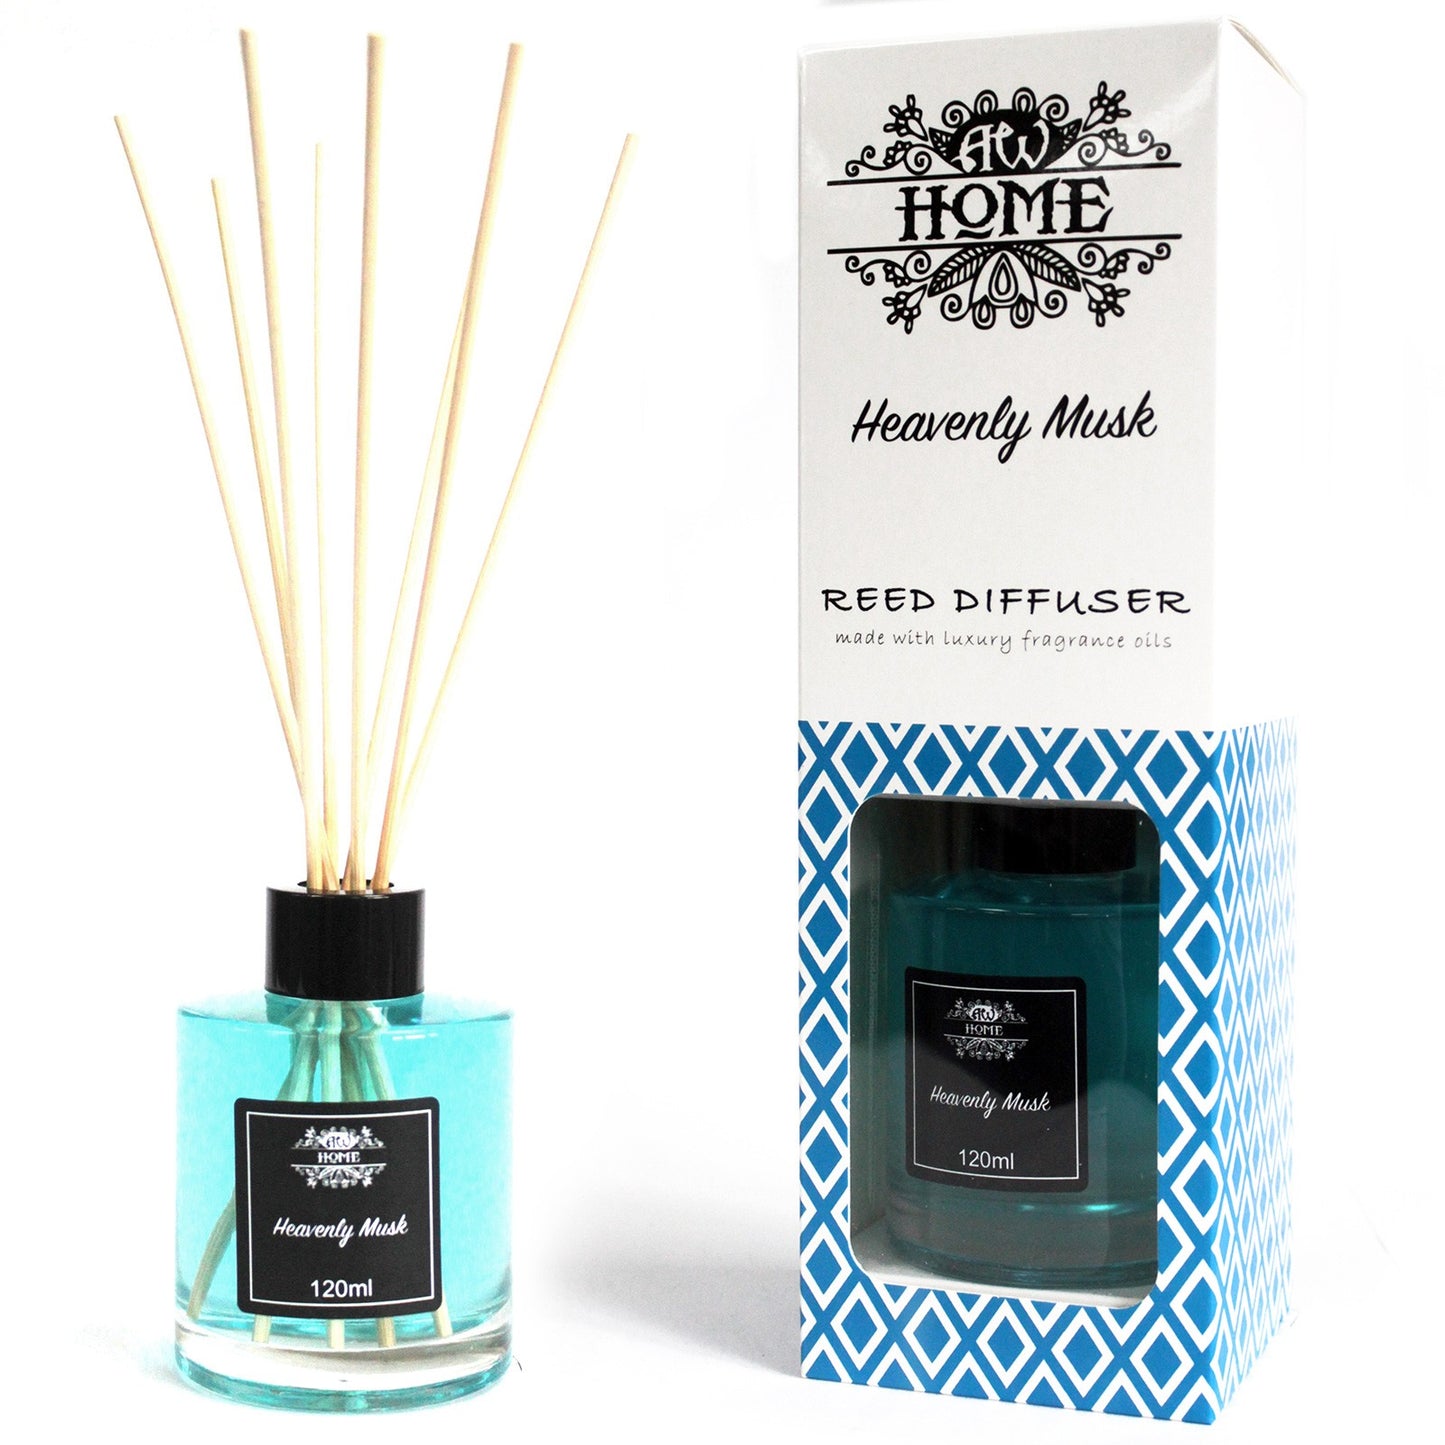 Reed Diffuser 120ml - Heavenly Musk